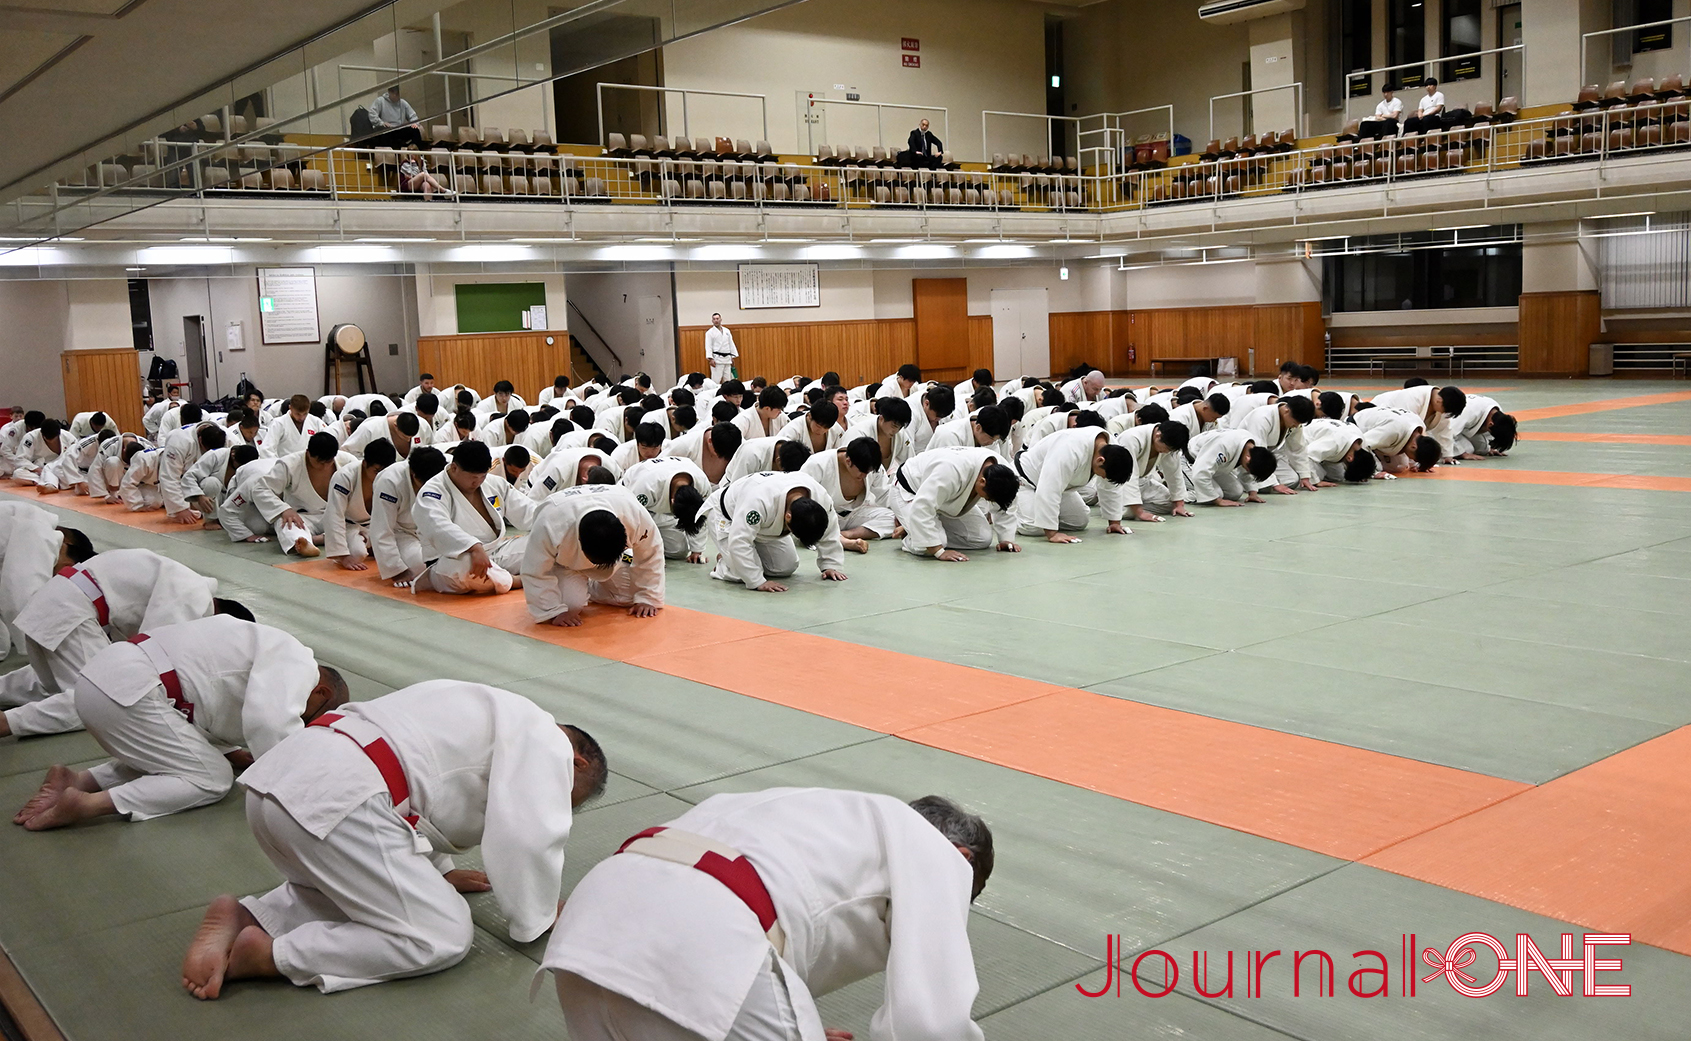 The scene of The lessons in Kodokan institute; Photo by Journal-ONE